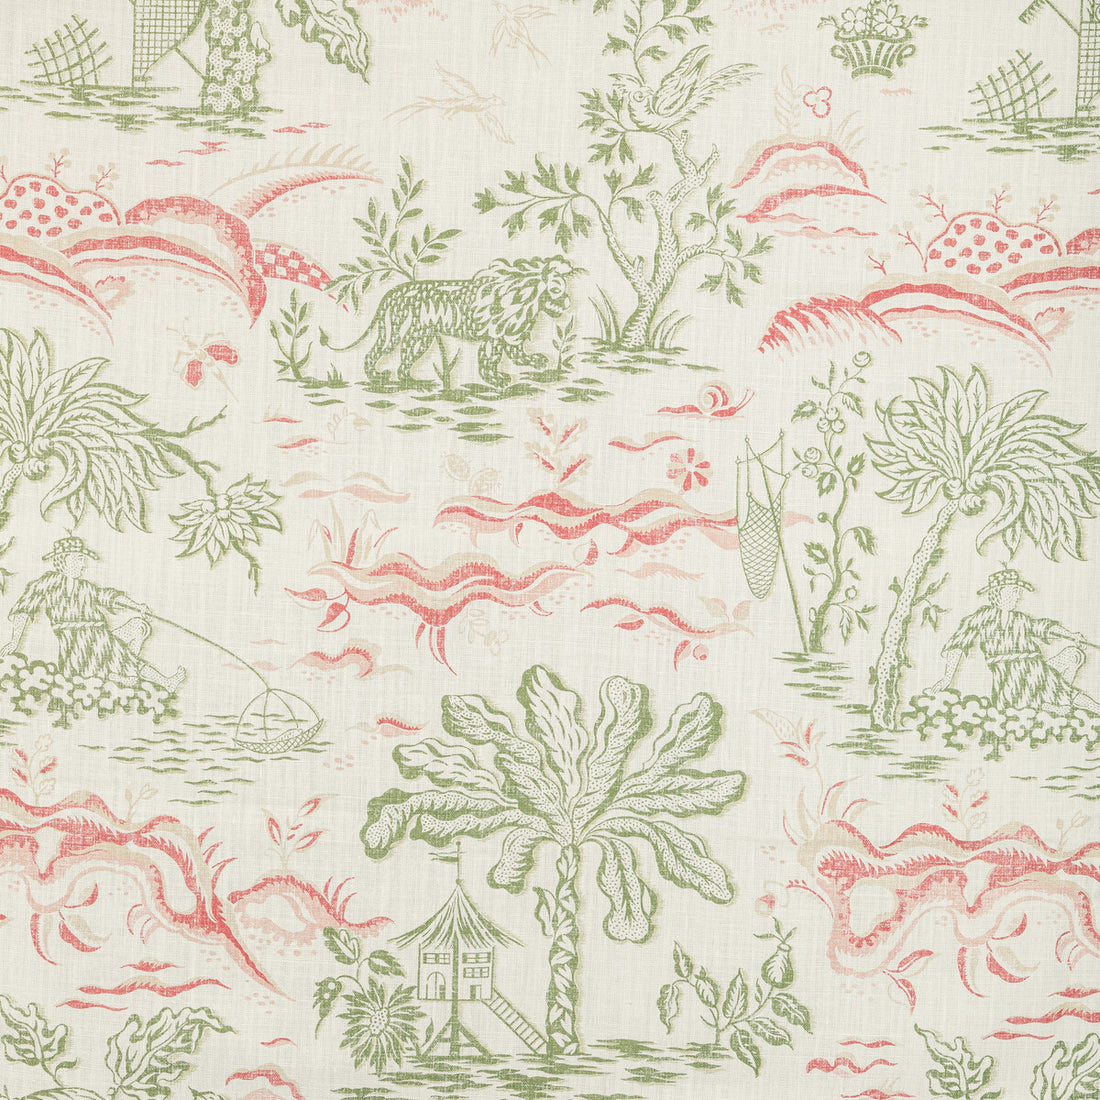 Valensole Print fabric in leaf/rose color - pattern 8022101.317.0 - by Brunschwig &amp; Fils in the Manoir collection